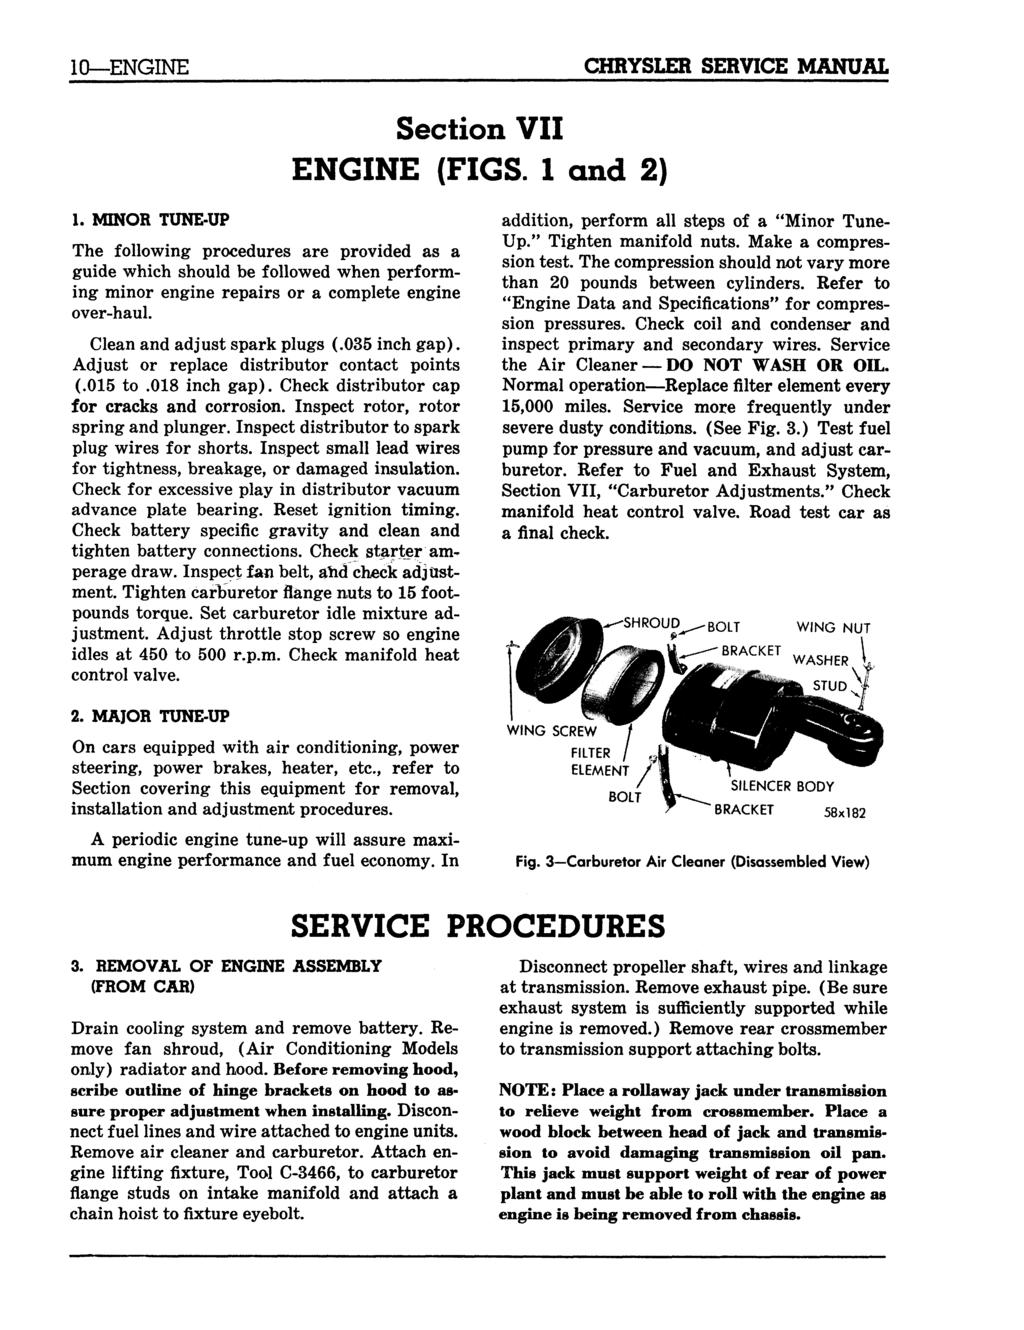 10 ENGINE SERVICE MANUAL Section VII ENGINE (FIGS. 1 and 2) 1.